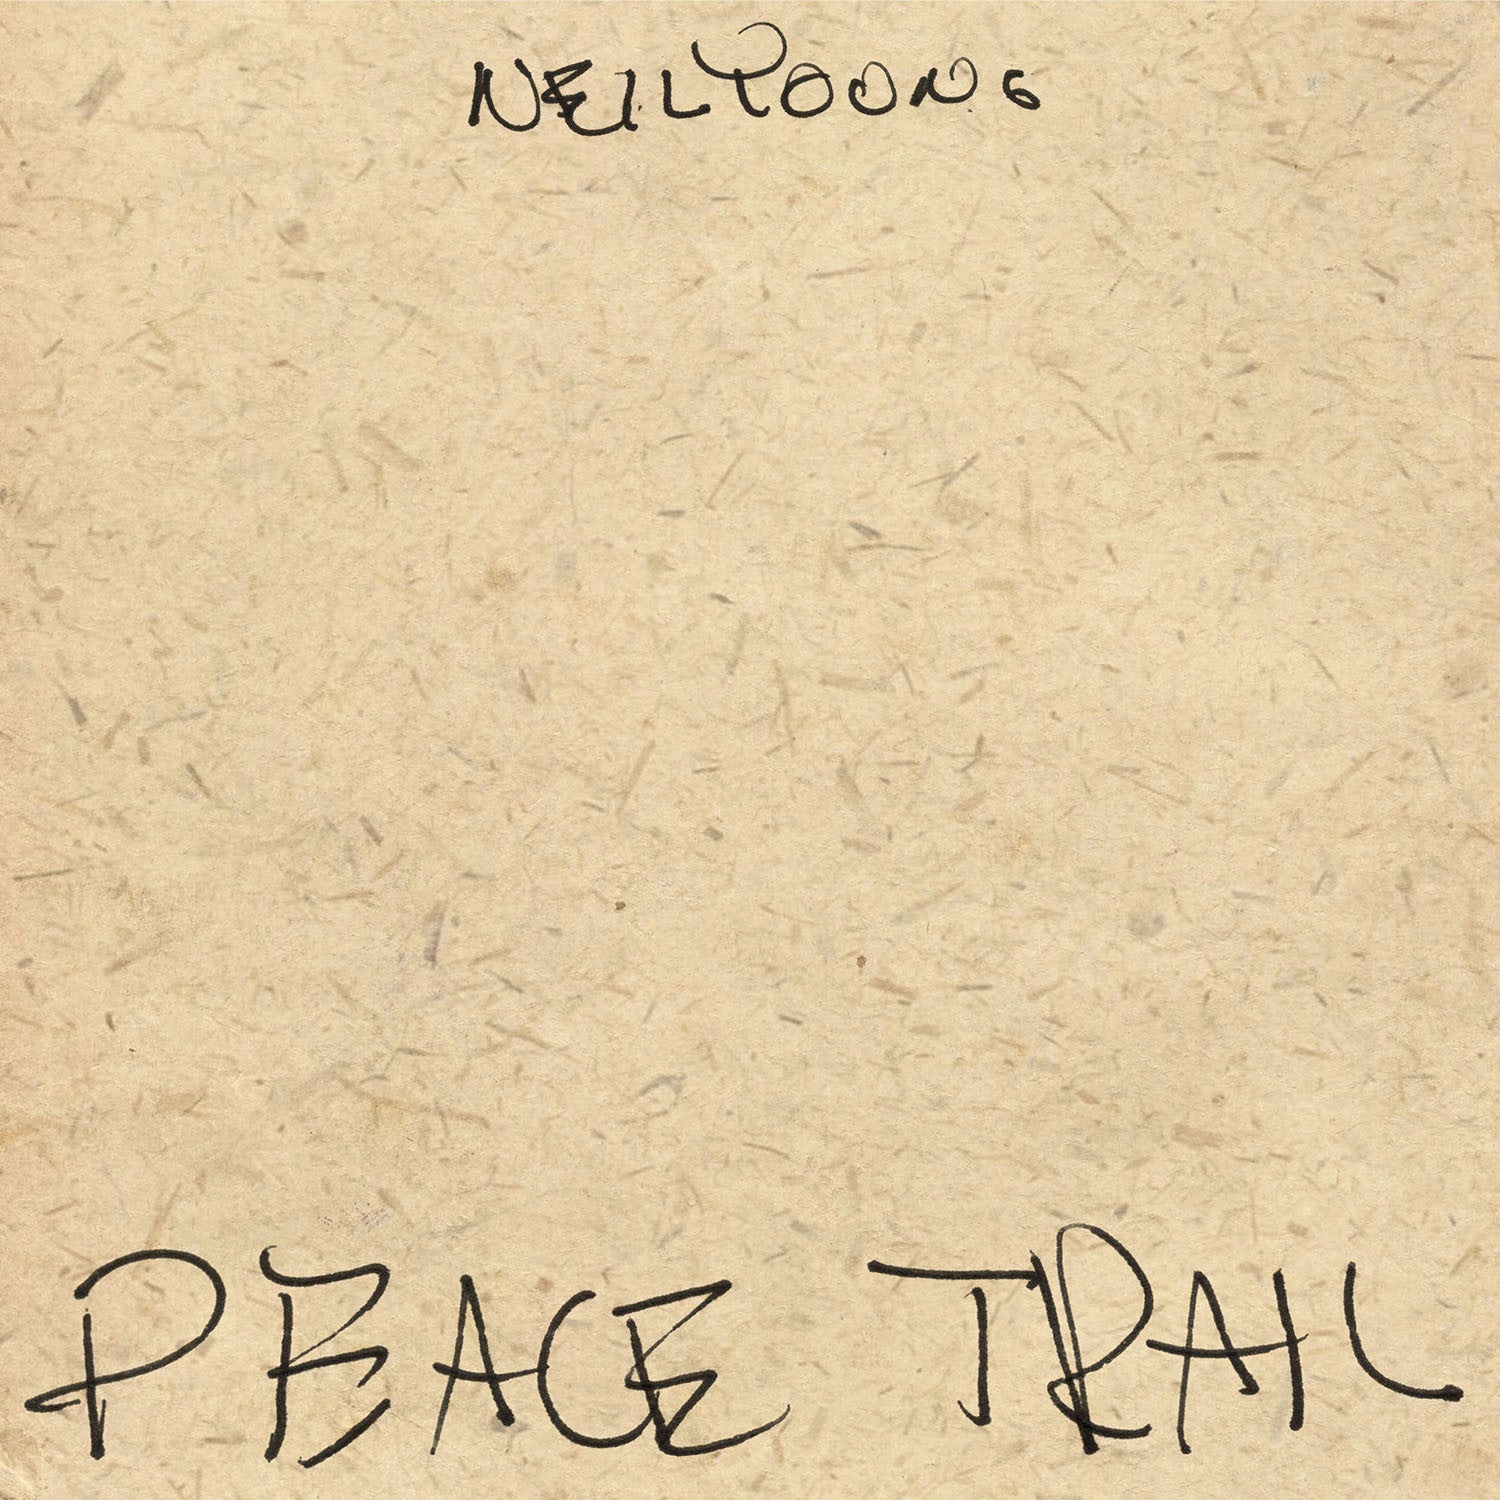 Neil Young - Peace Trail (Vinyl LP Record)